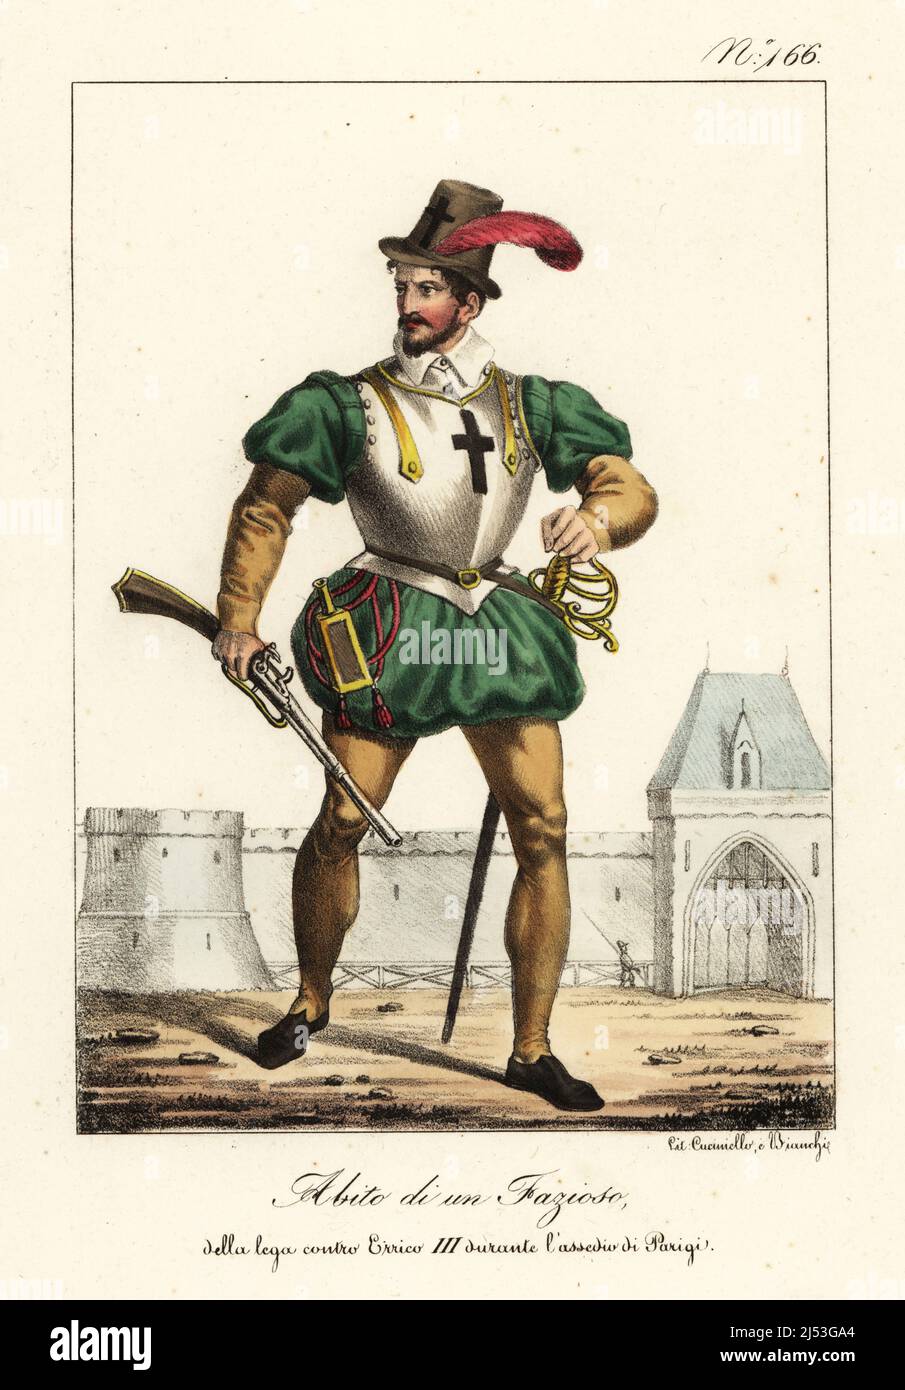 A partisan of the League opposing King Henry III during the Siege of Paris, French Wars of Religion, 1590. In plumed hat, breastplate, doublet, bombasted hose, armed with musket and swrod. Costume d'un Ligueur pendant le Siege de Paris. Handcoloured lithograph by Lorenzo Bianchi and Domenico Cuciniello after Hippolyte Lecomte from Costumi civili e militari della monarchia francese dal 1200 al 1820, Naples, 1825. Italian edition of Lecomte’s Civilian and military costumes of the French monarchy from 1200 to 1820. Stock Photo